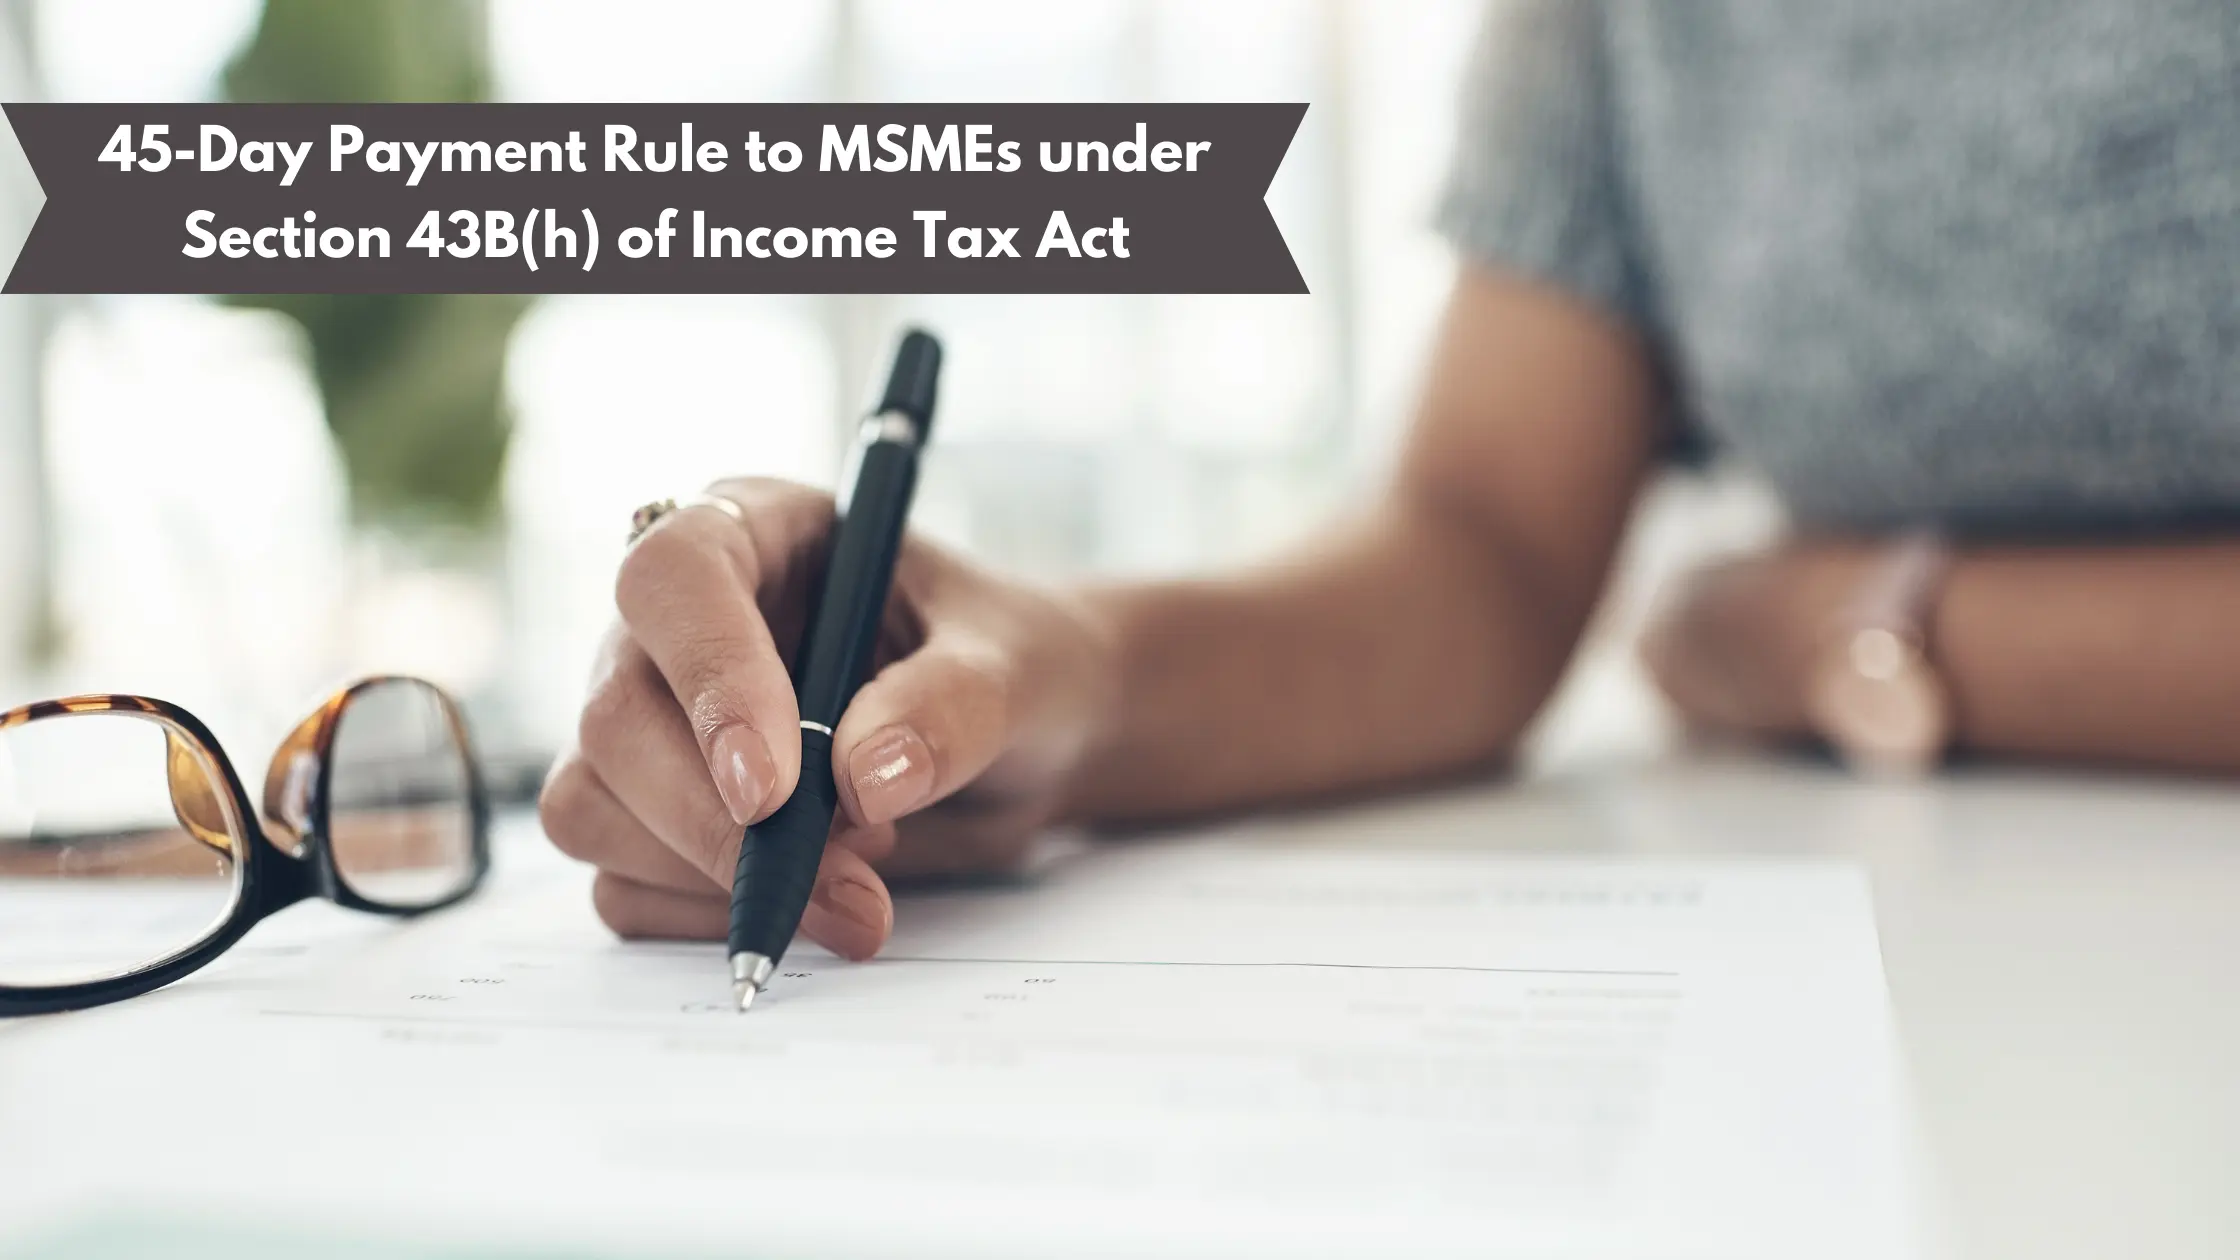 45-Day Payment Rule to MSMEs under Section 43B(h) of Income Tax Act